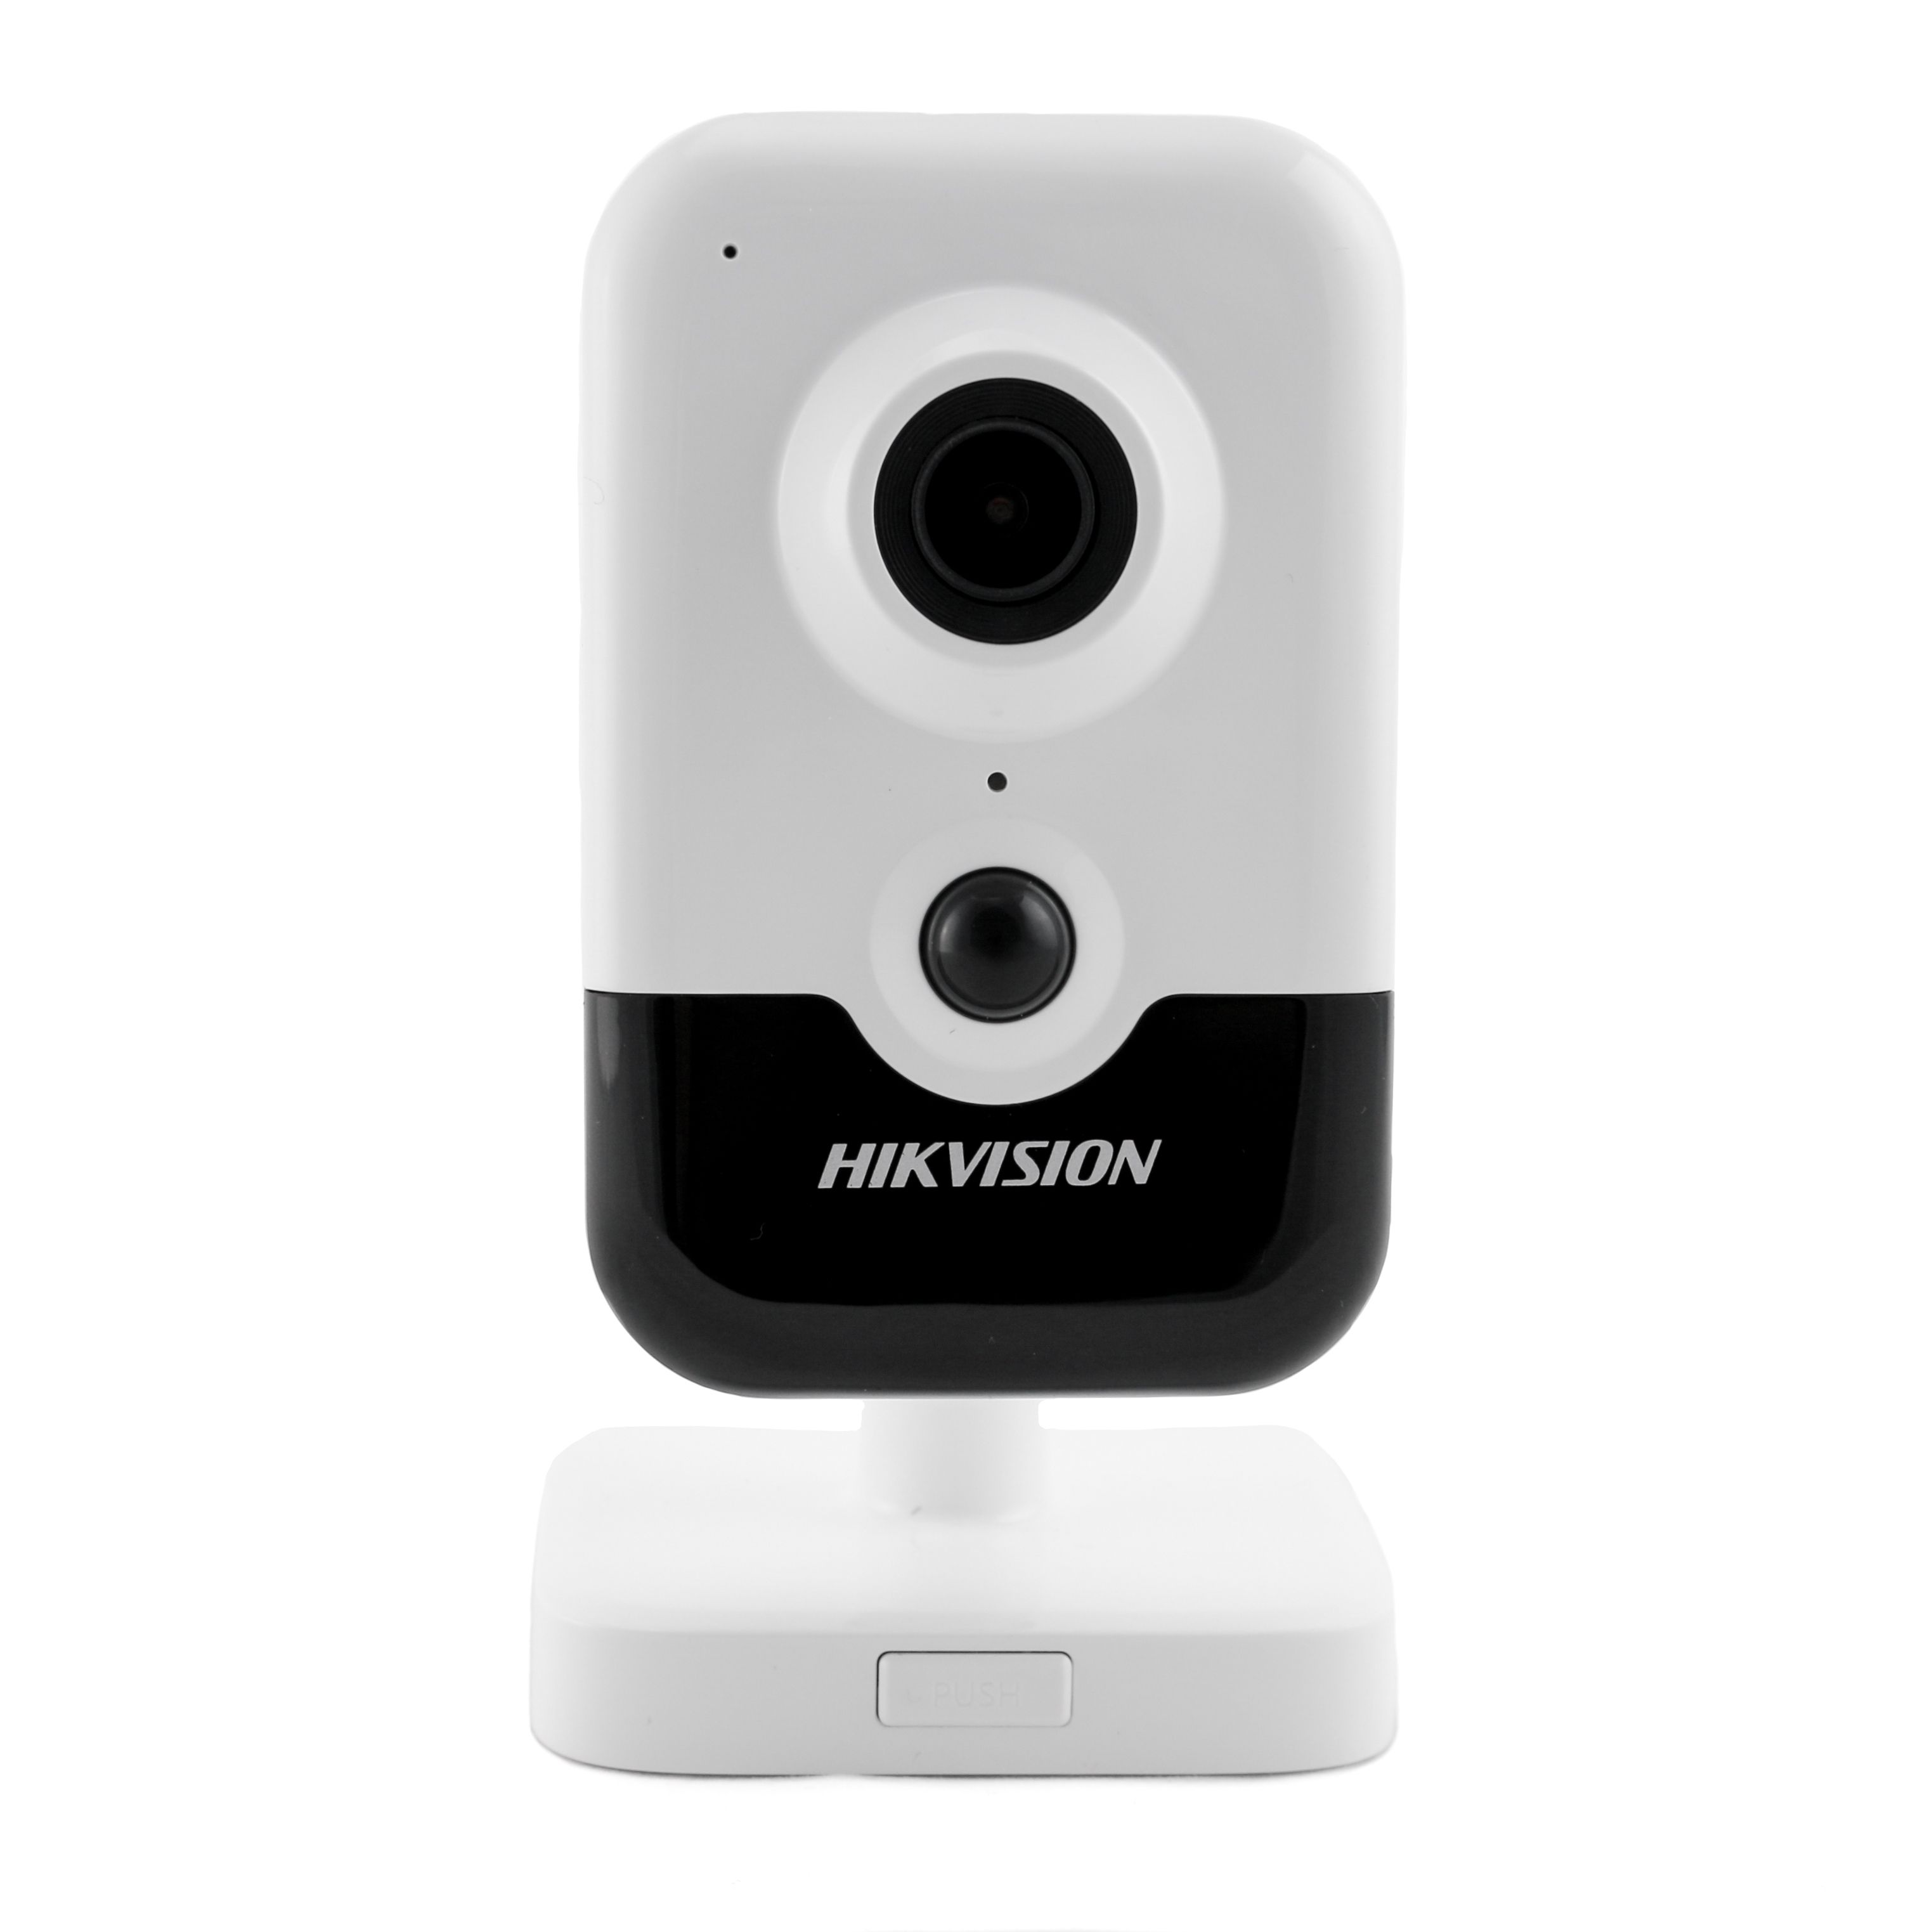 Hikvision DS-2CD2455FWD-IW | 2.8mm 5MP Cube Network Camera